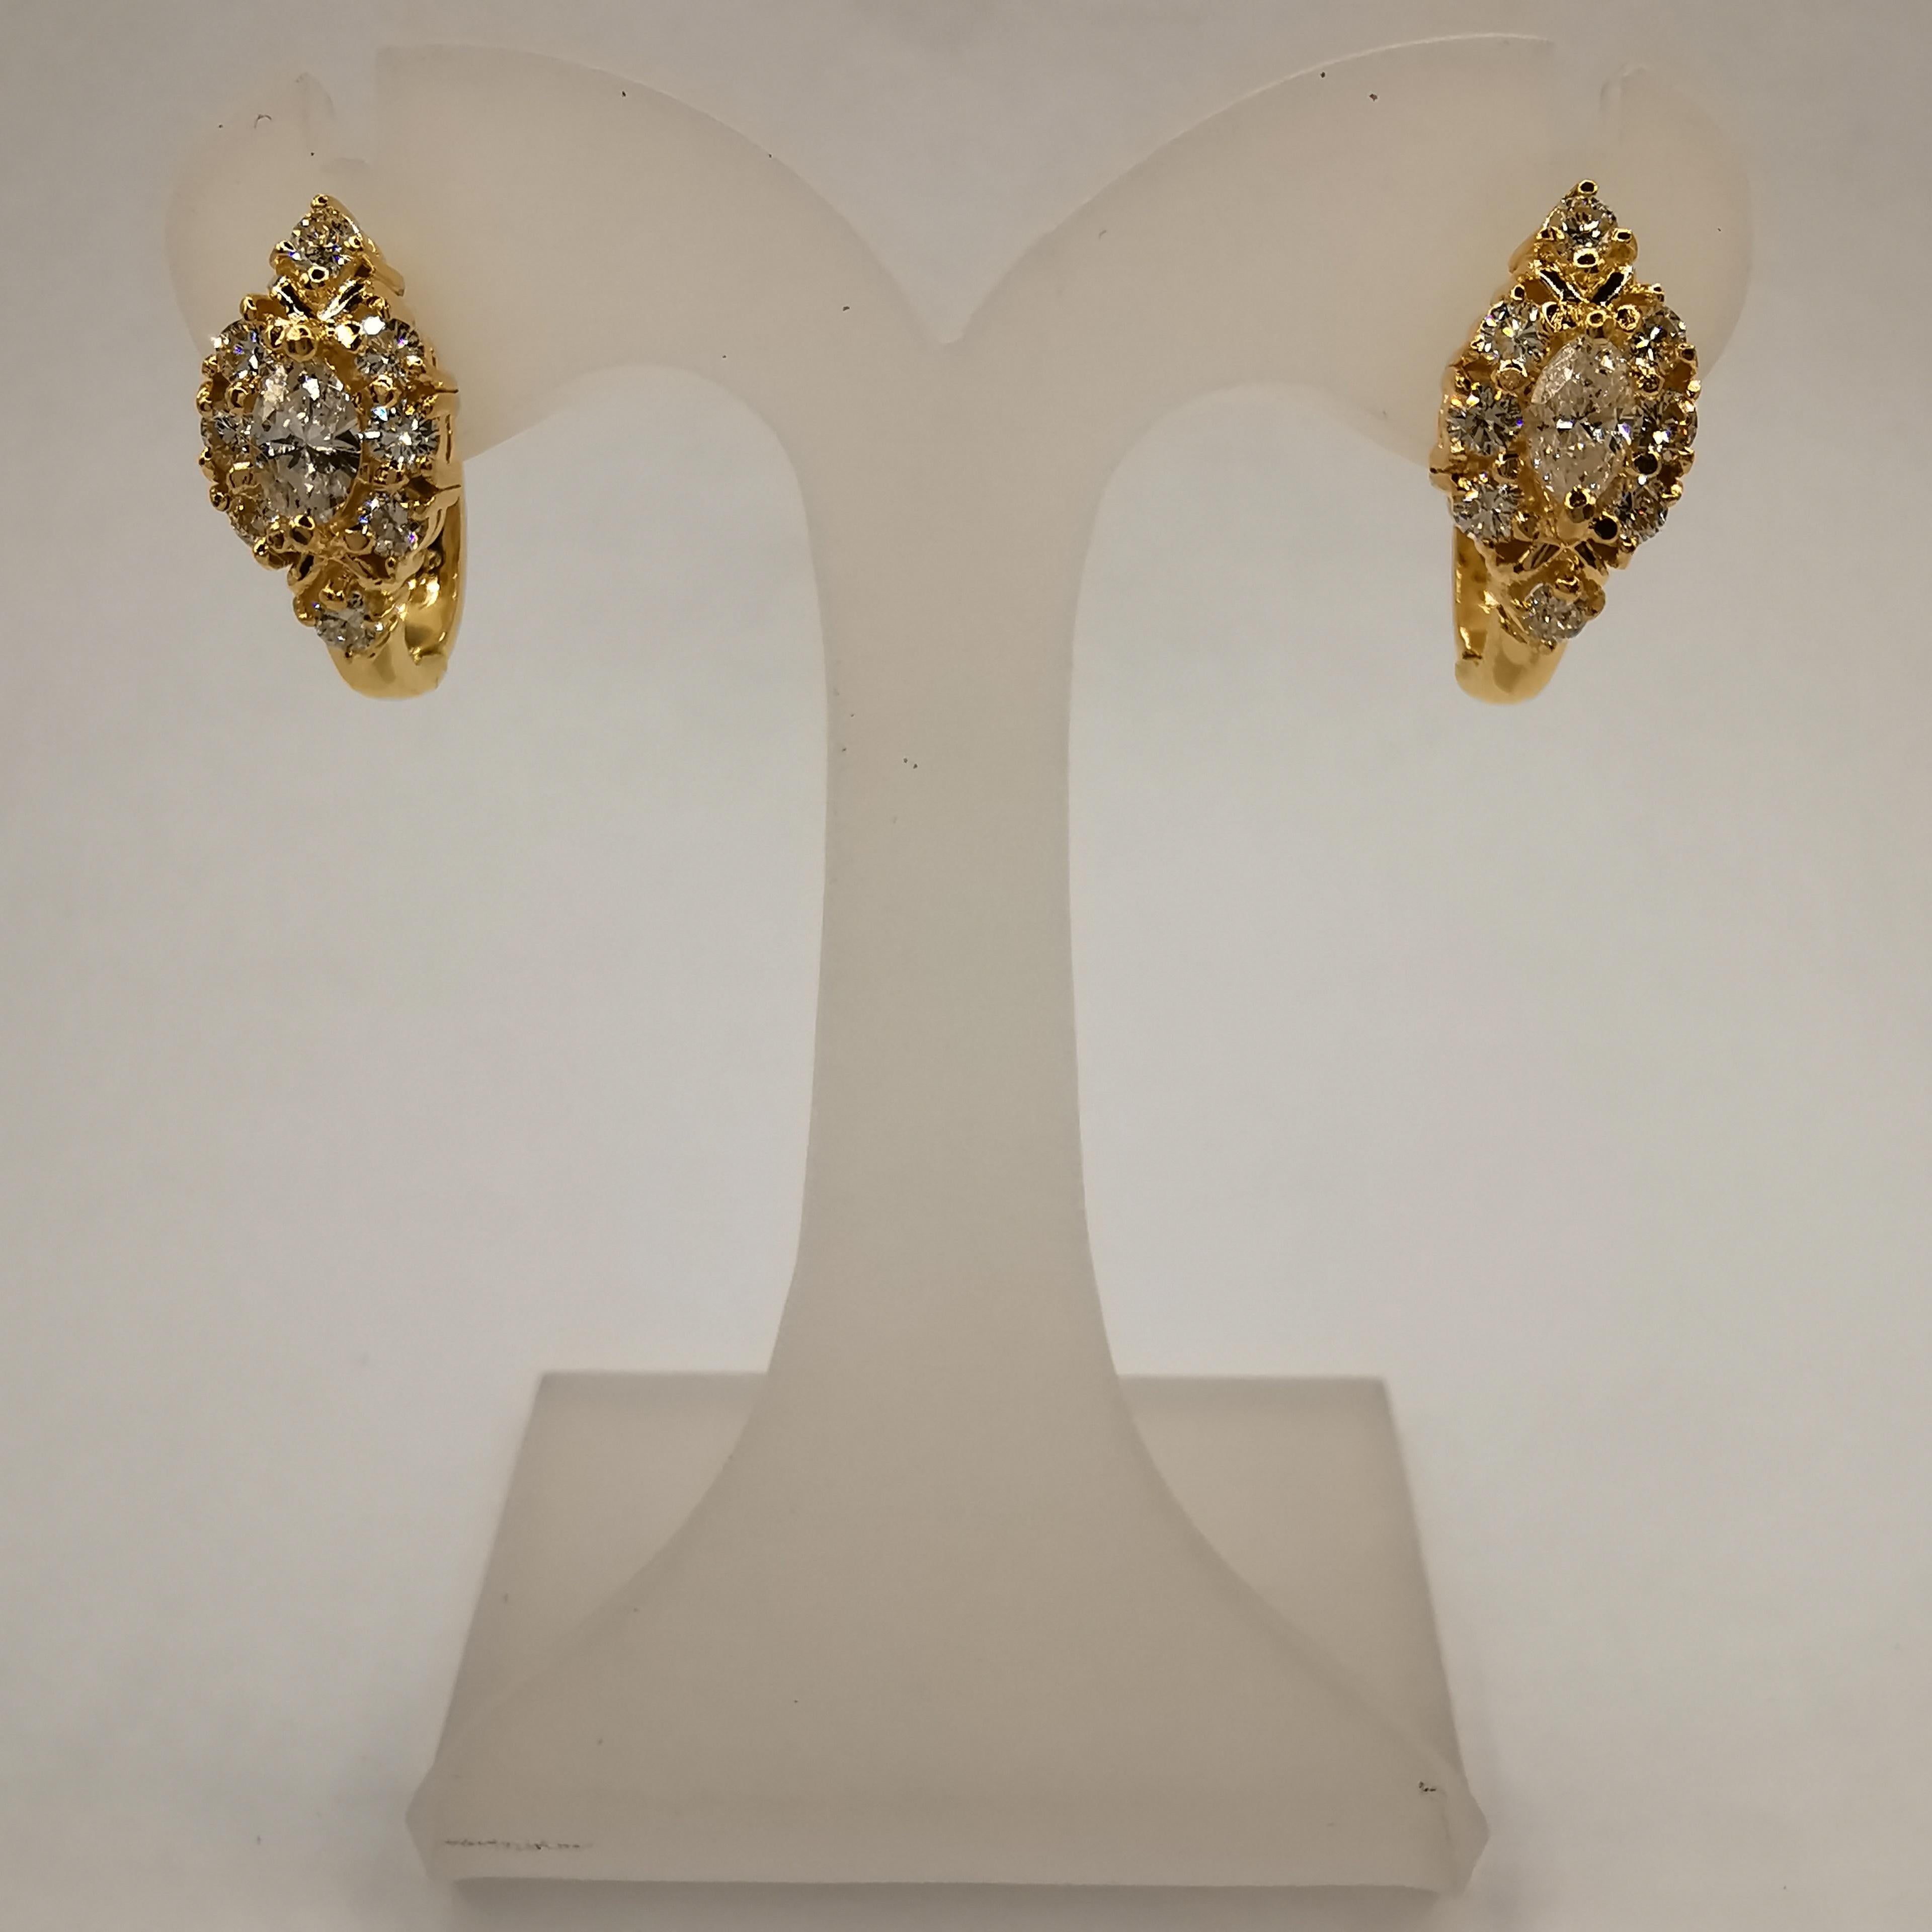 These stunning 115 carat marquise diamond earrings are the perfect accessory for any special occasion. The earrings are made of 850 yellow gold, which has a gold purity slightly above 20k. They feature a pair of sparkling marquise cut diamonds